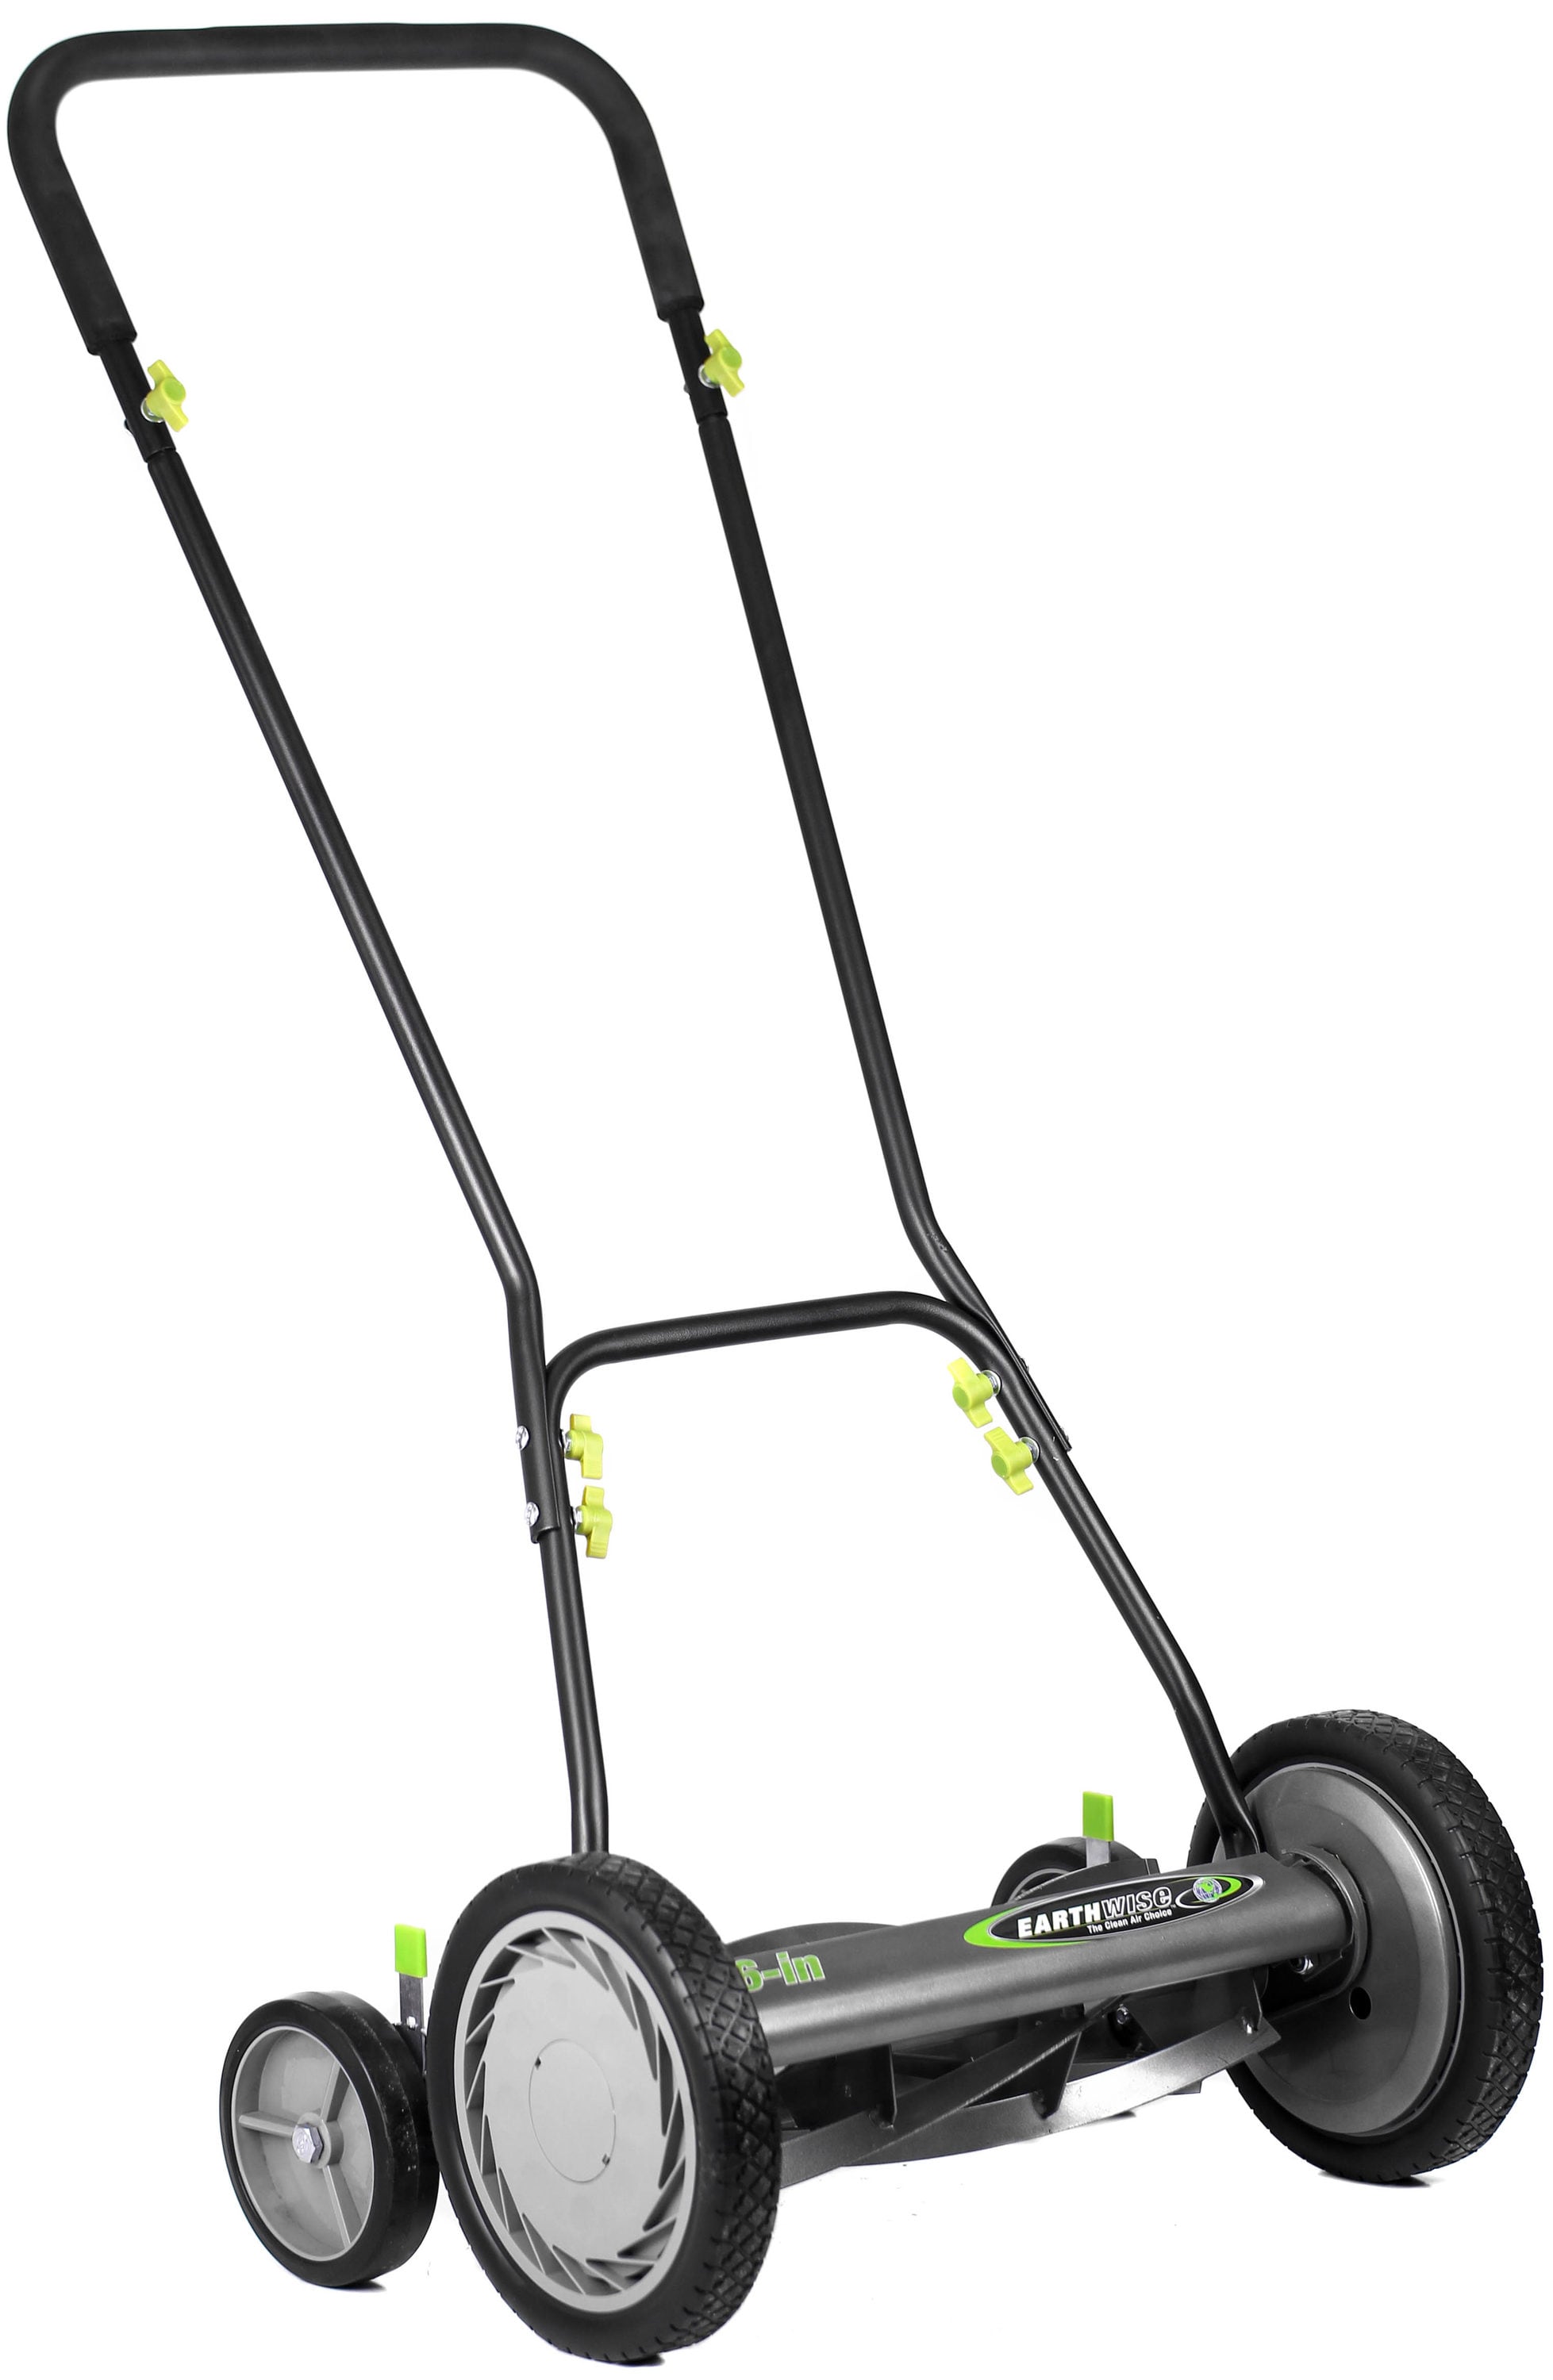 Earthwise Lawn Mowers at